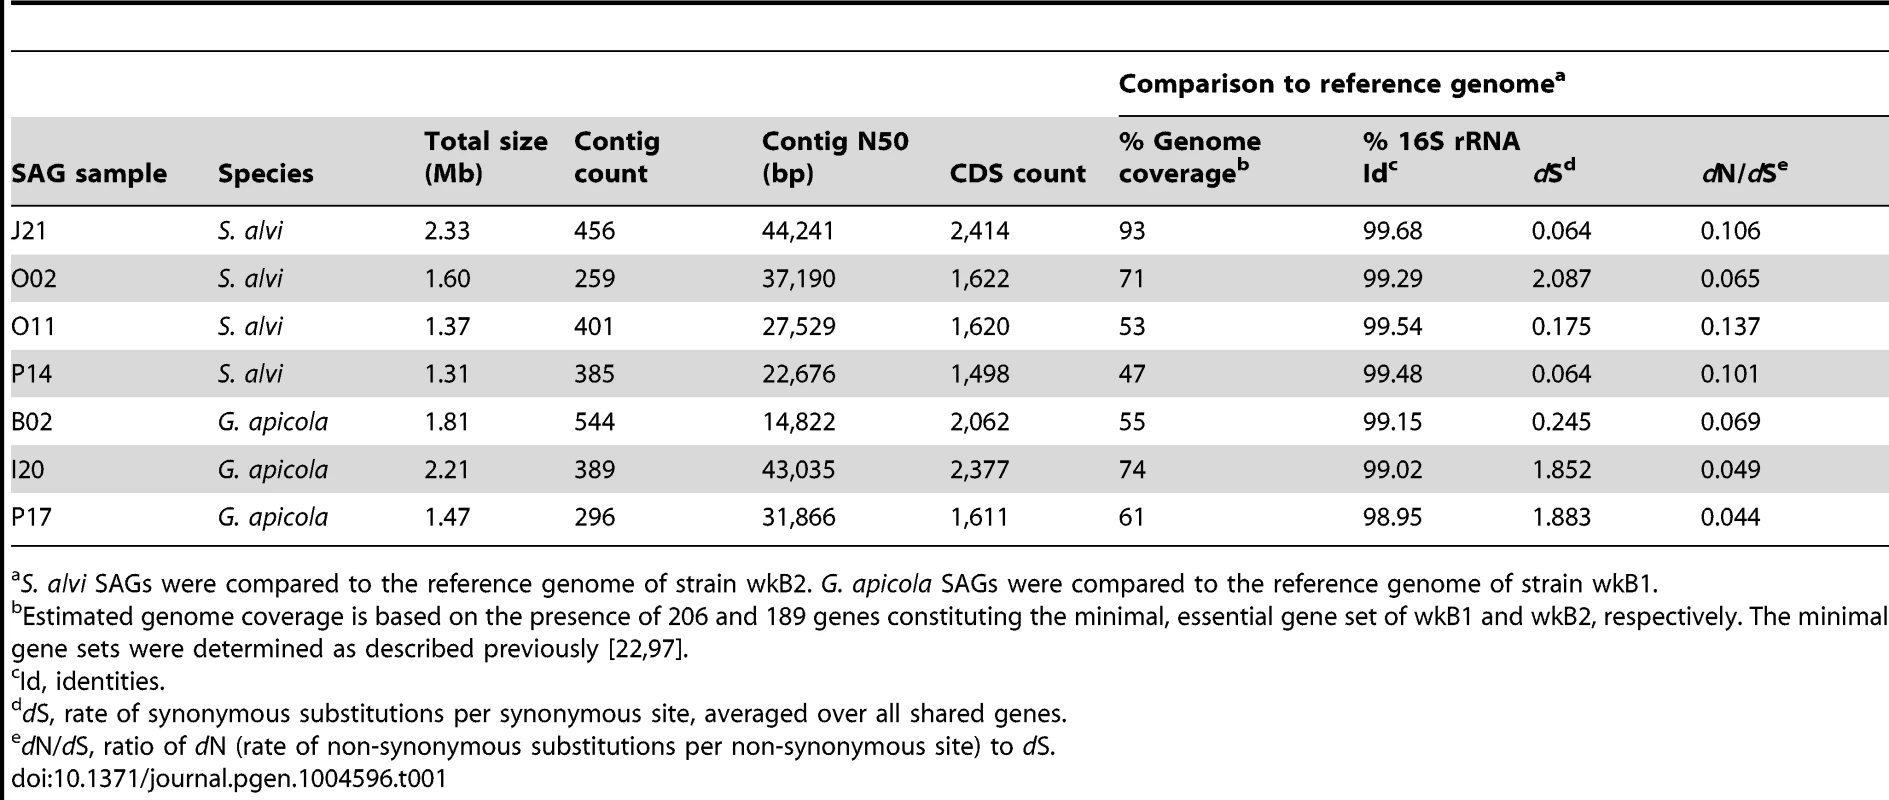 Genome features of SAGs and comparisons to their reference genome.